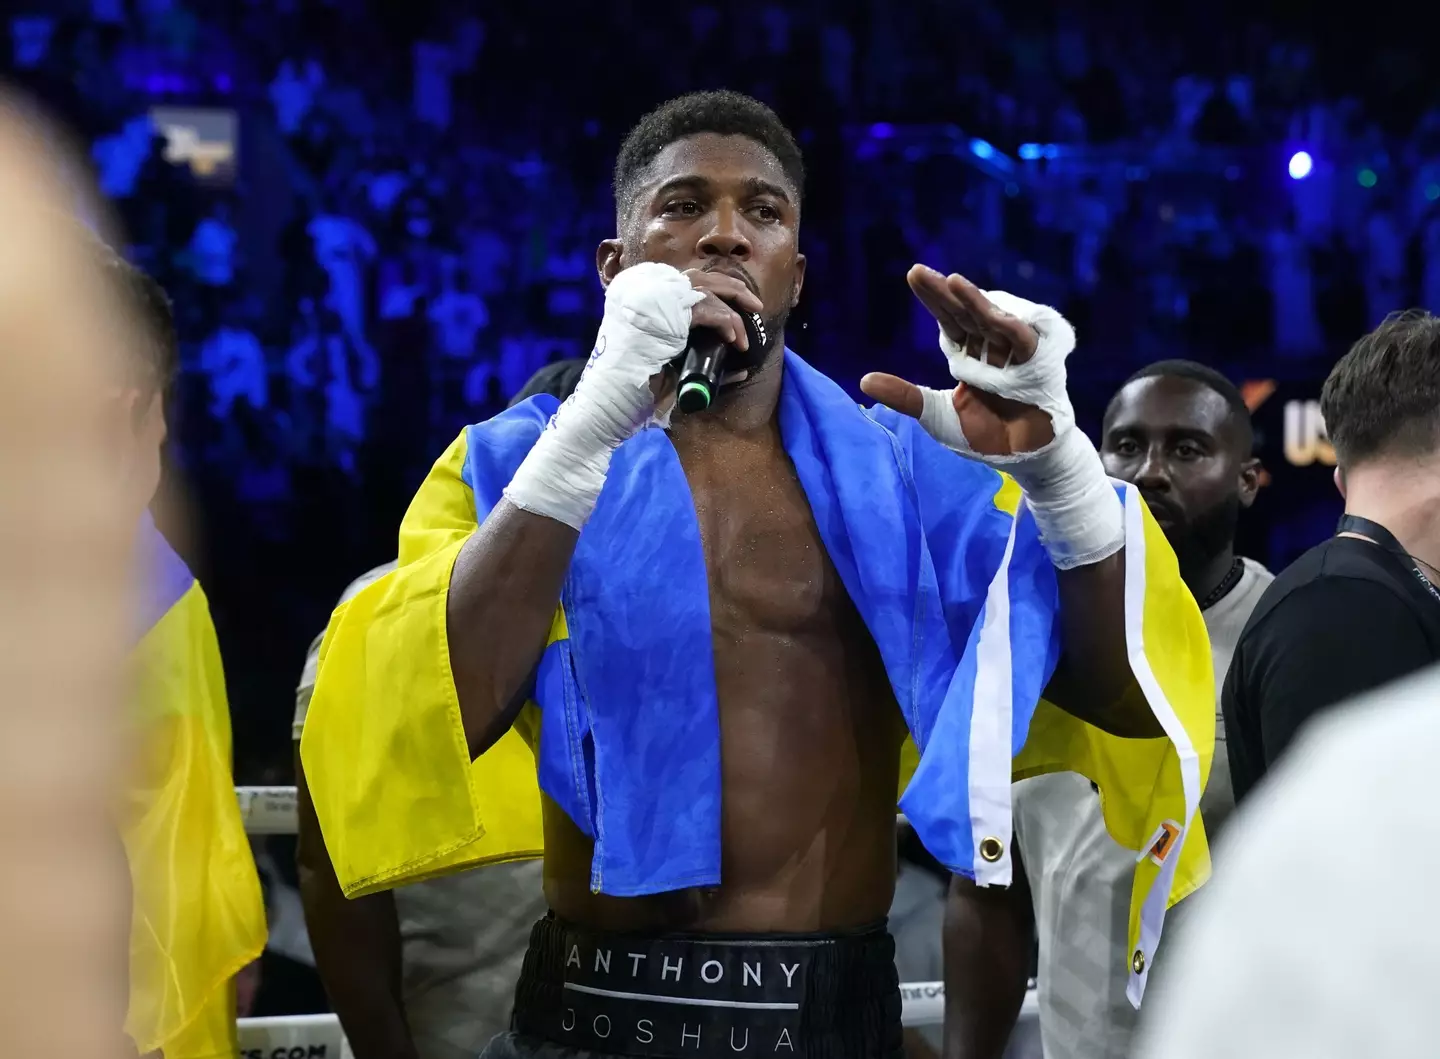 Joshua says he 'let himself down' with his emotional outburst following his defeat to Usyk.